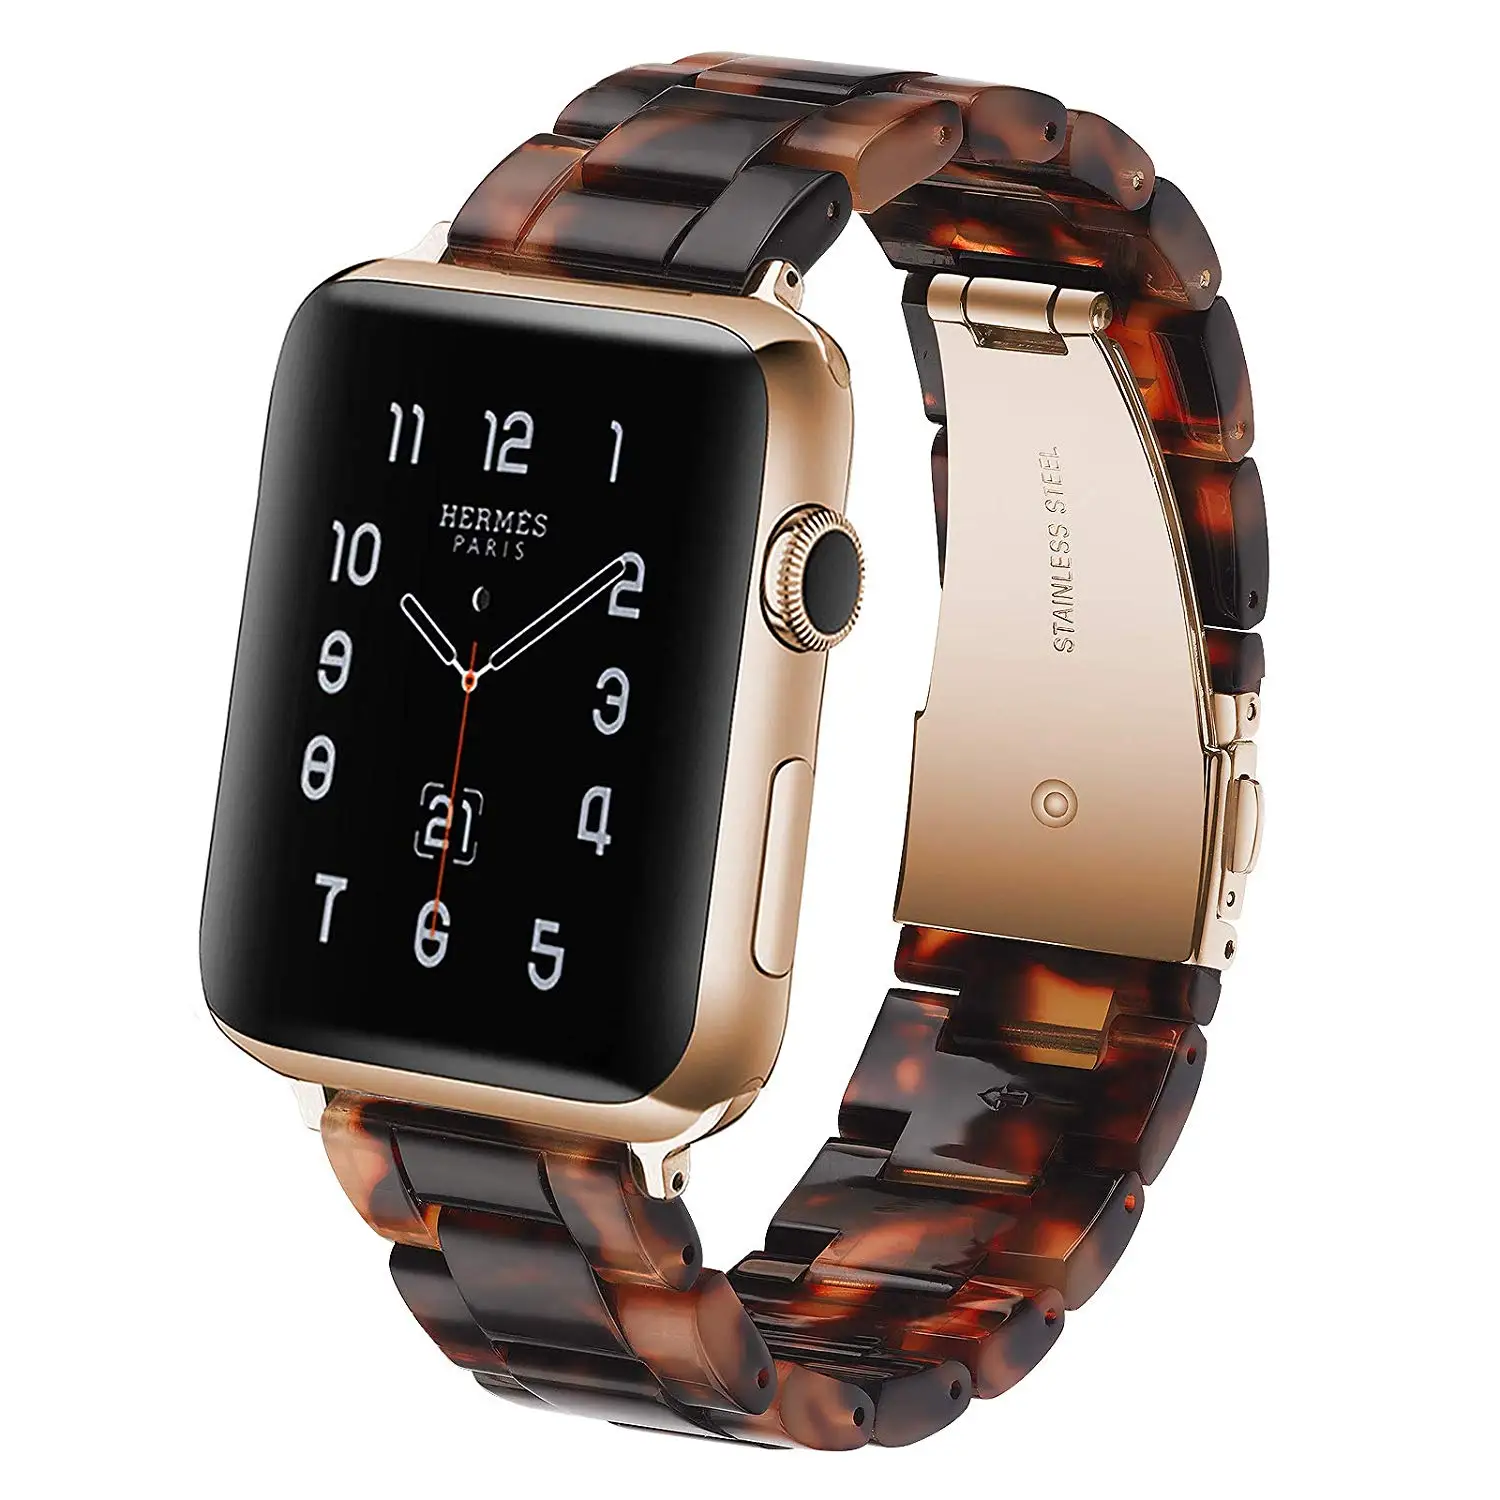 

Shell tortoise stone resin watch band Amazon replace straps light straps for applewatch iwatch series 3 4 5 6, Multi-color